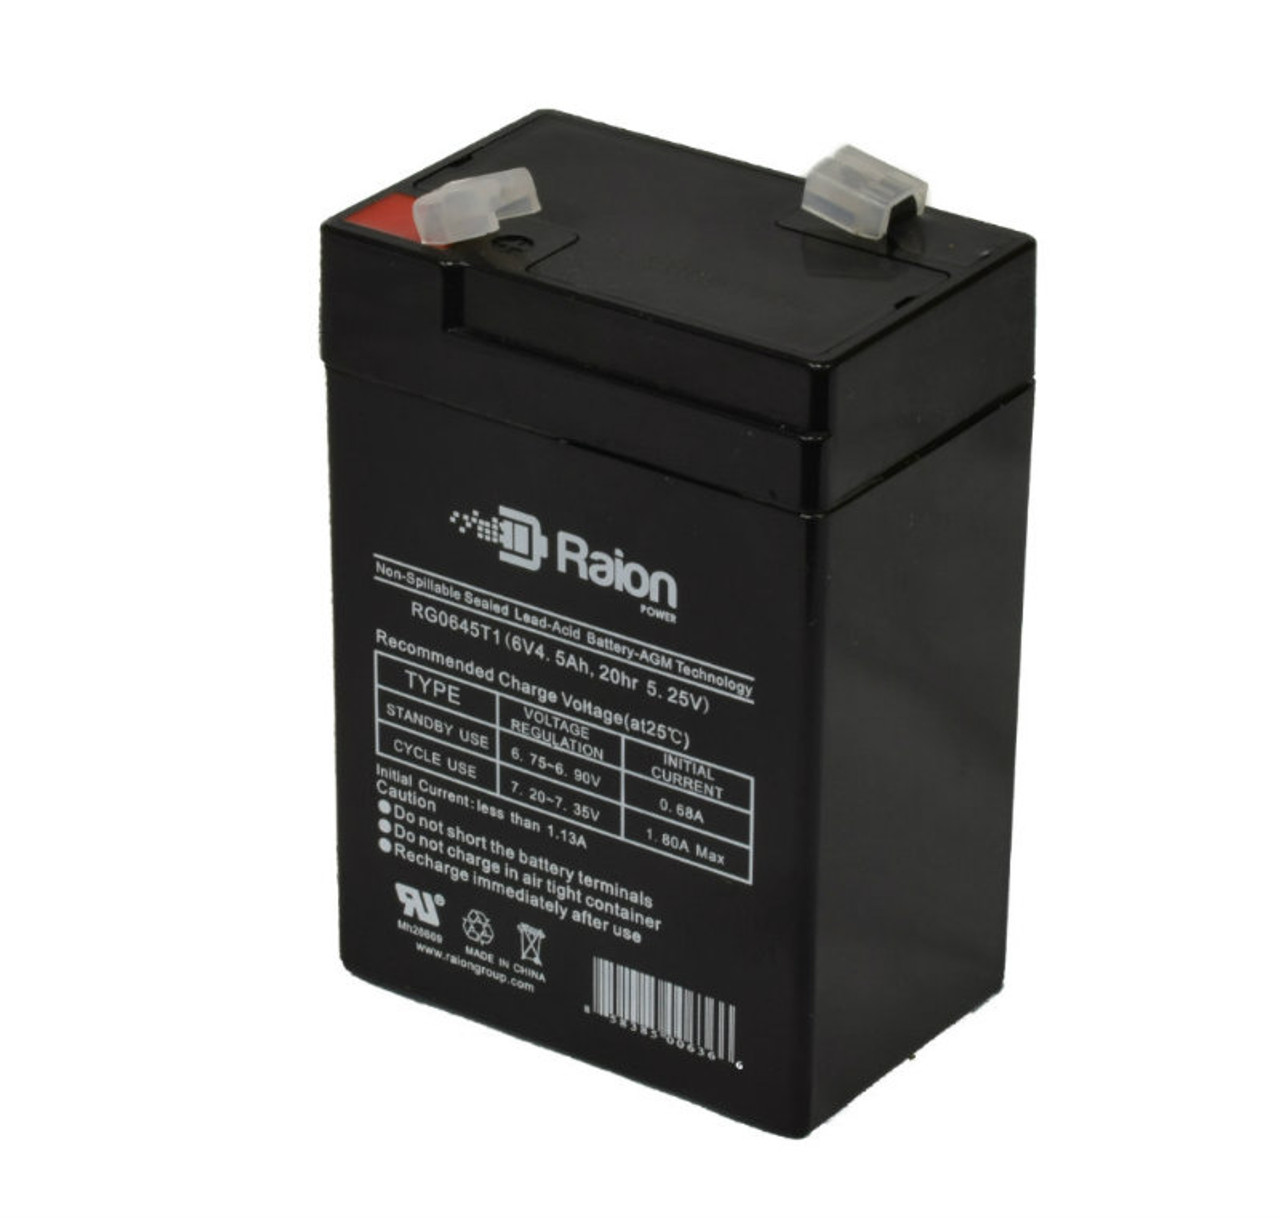 Raion Power RG0645T1 6V 4.5Ah Replacement Battery Cartridge for Chloride RER1